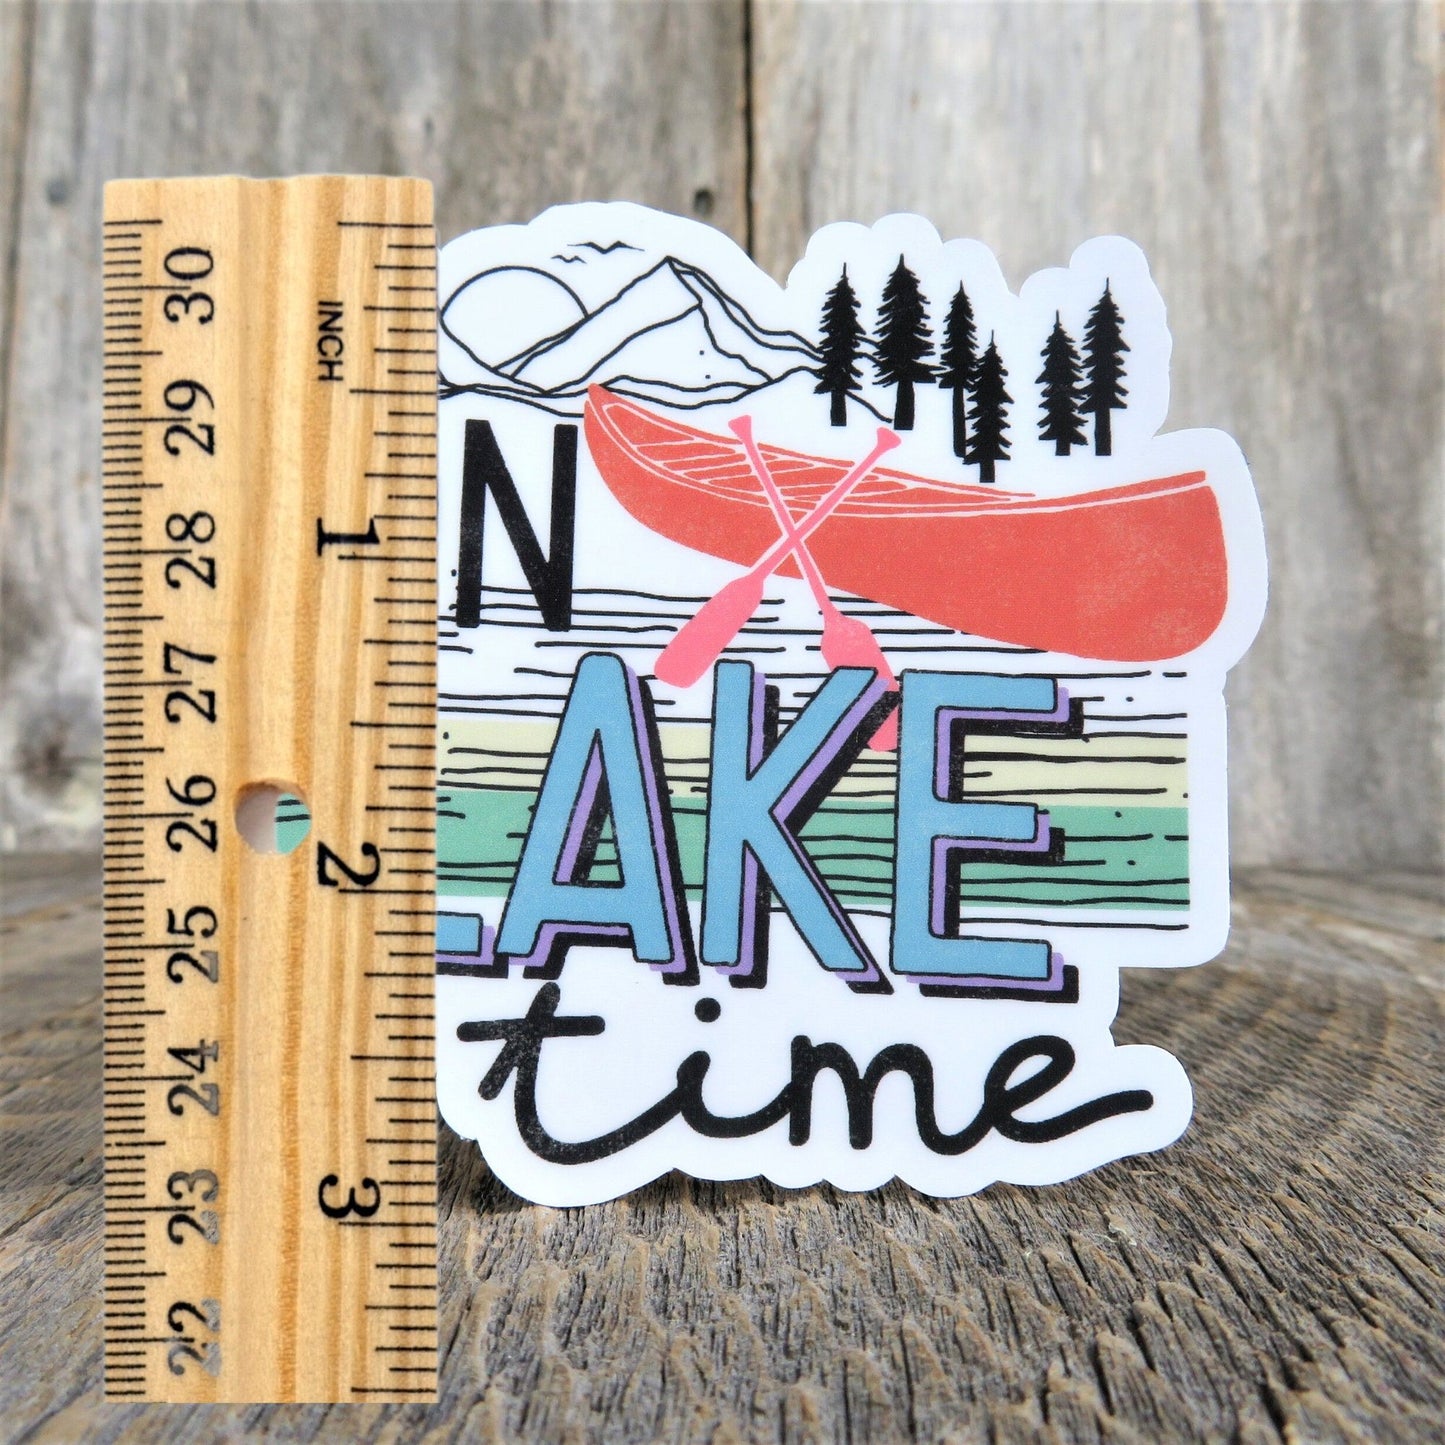 On Lake Time Sticker Waterproof Lake Lover Boating Sticker Canoe Camping Outdoors Retro Colors